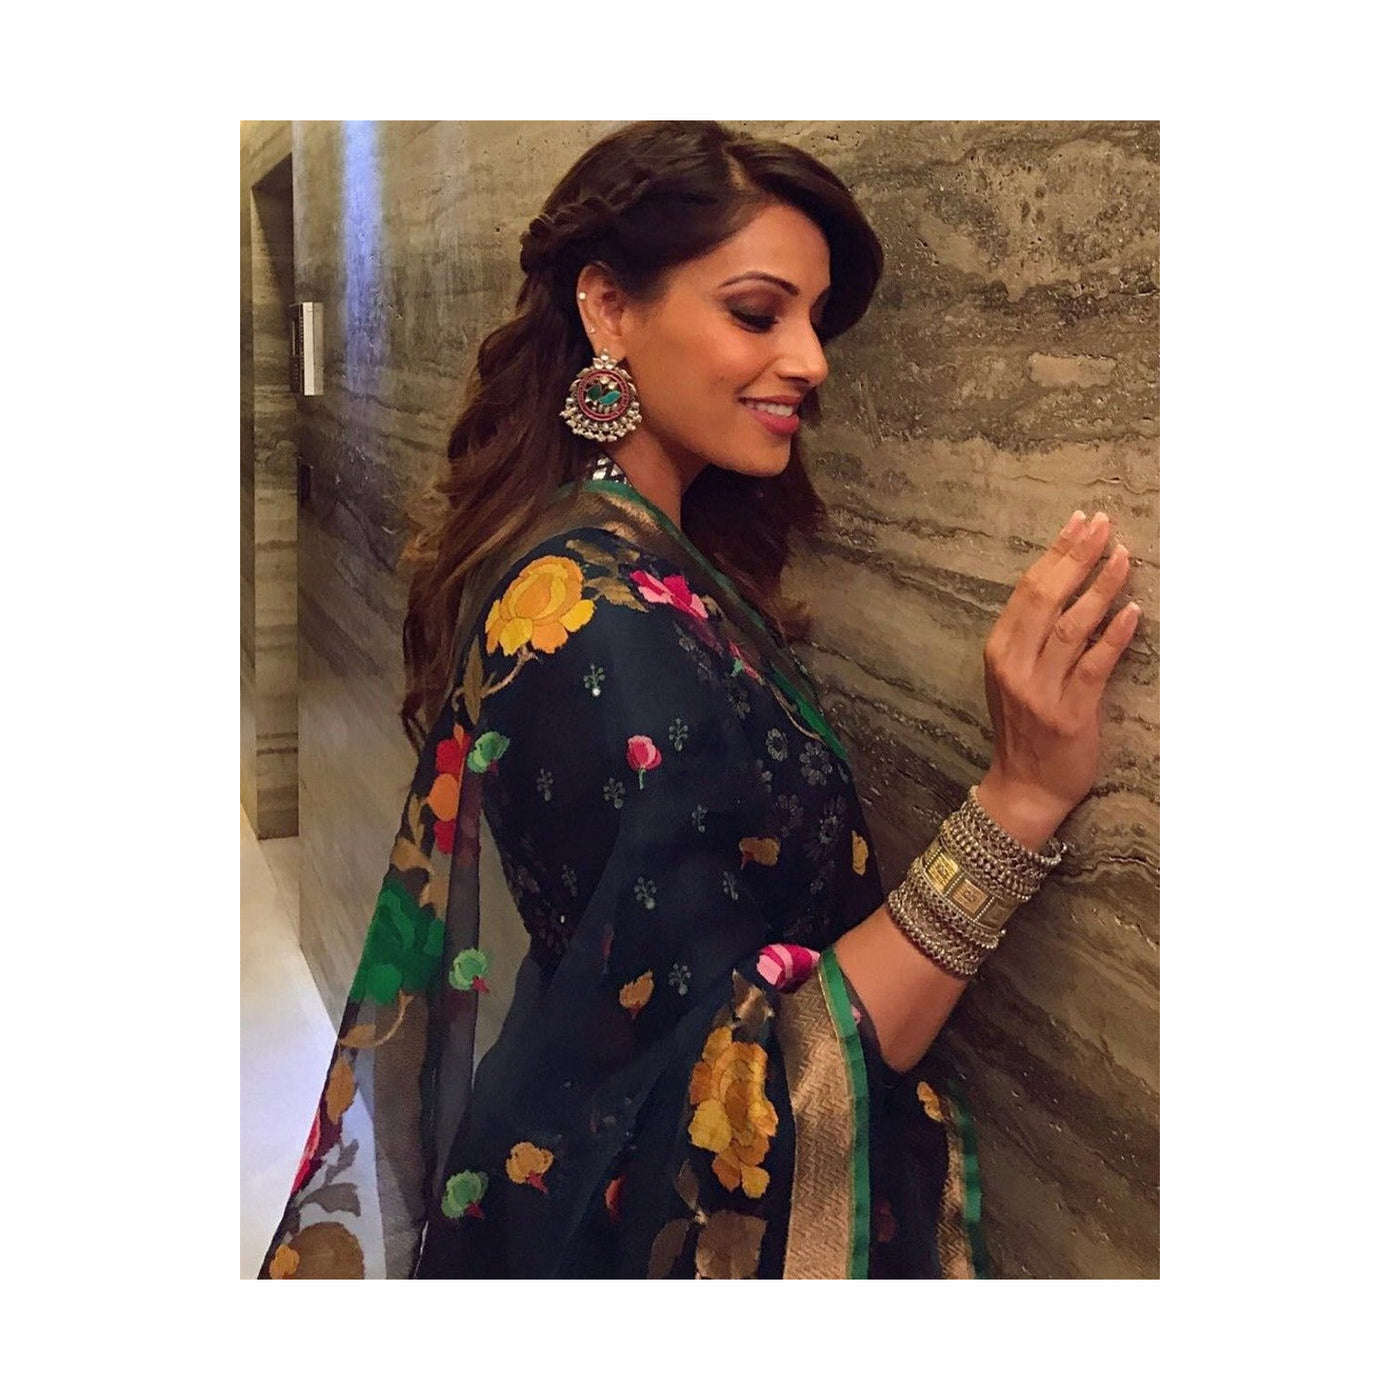 Bipasha Basu in Silver Handmade Earrings Studded With Emerald Stone And Silver Bangle Ruby Stone